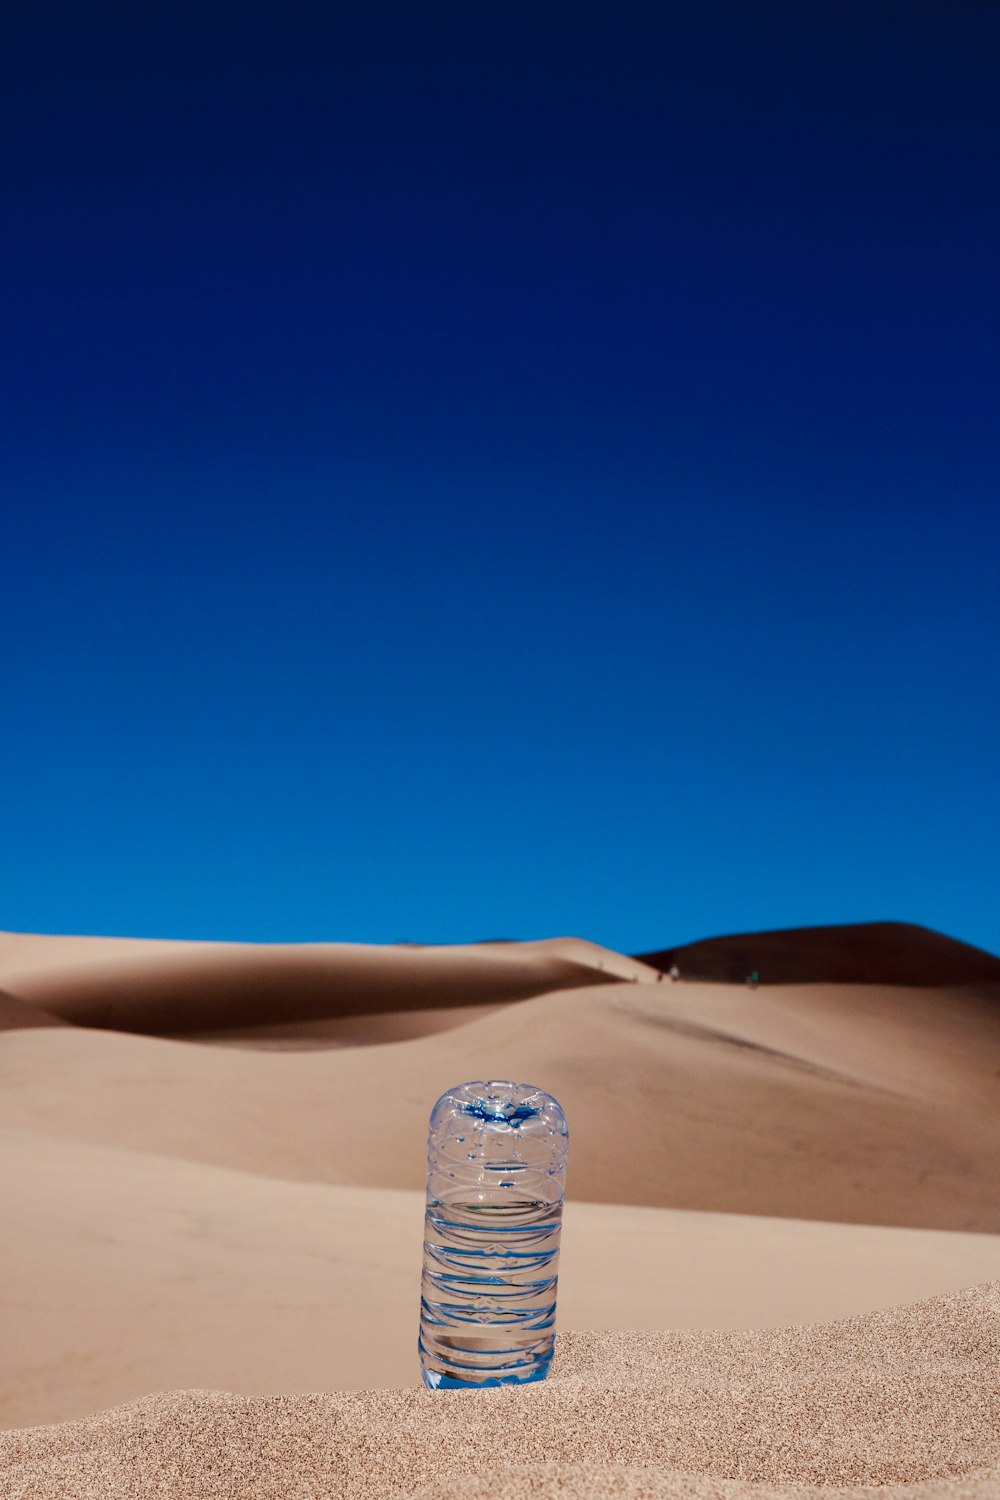 clear plastic bottle on brown sand